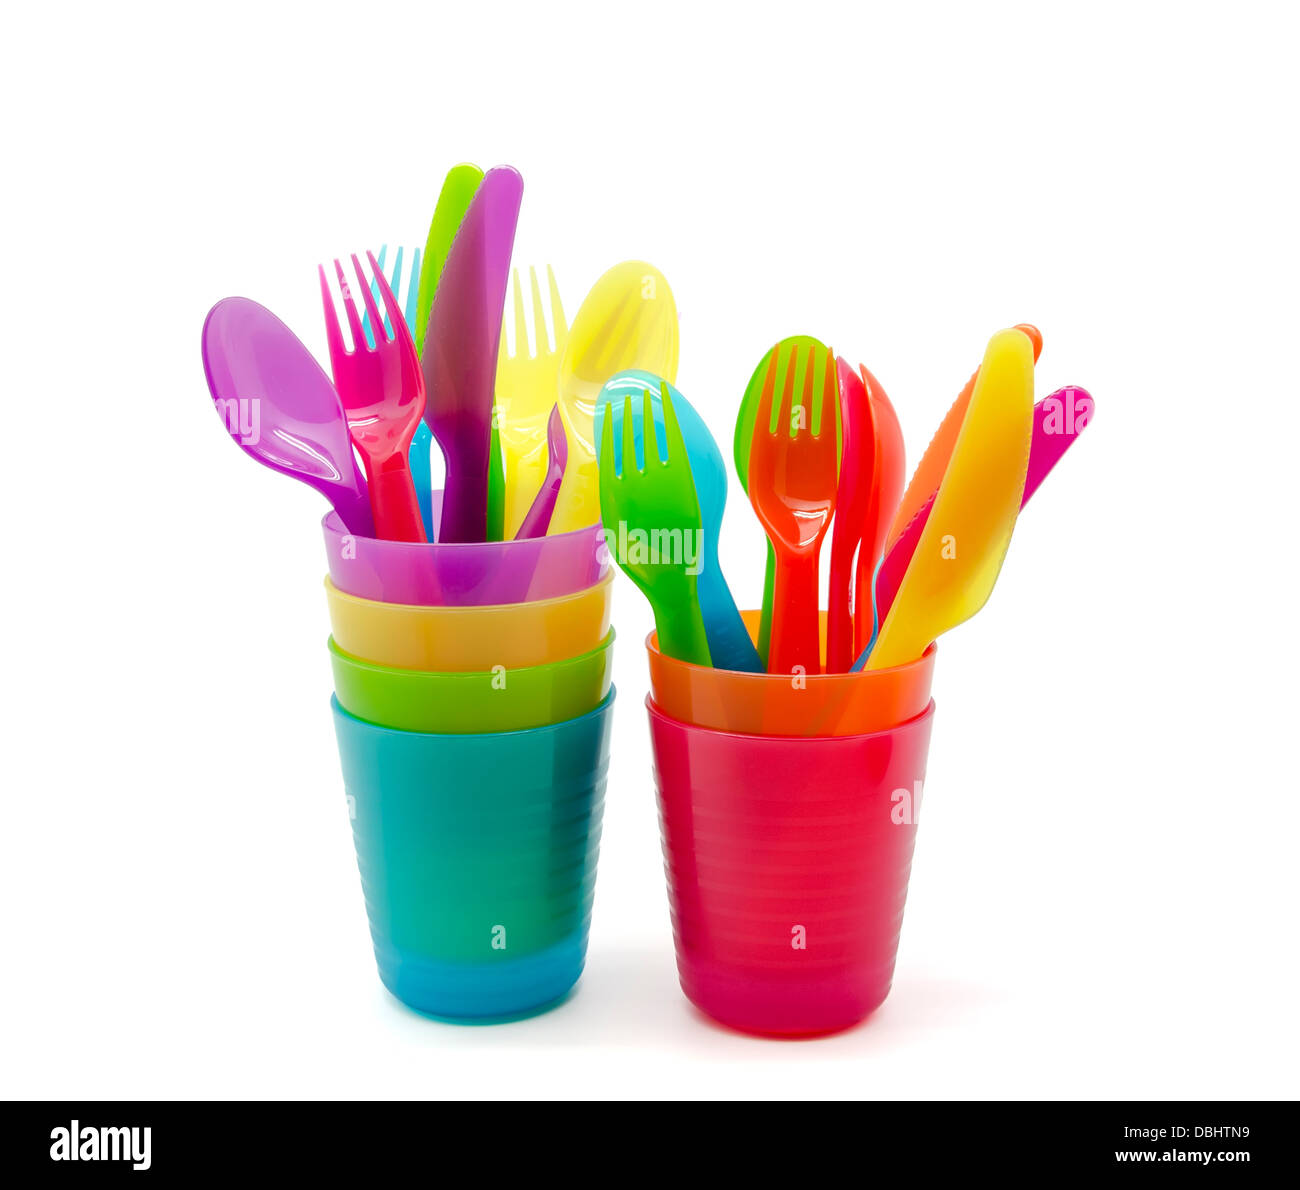 Plastic tableware of various colors on white background Stock Photo